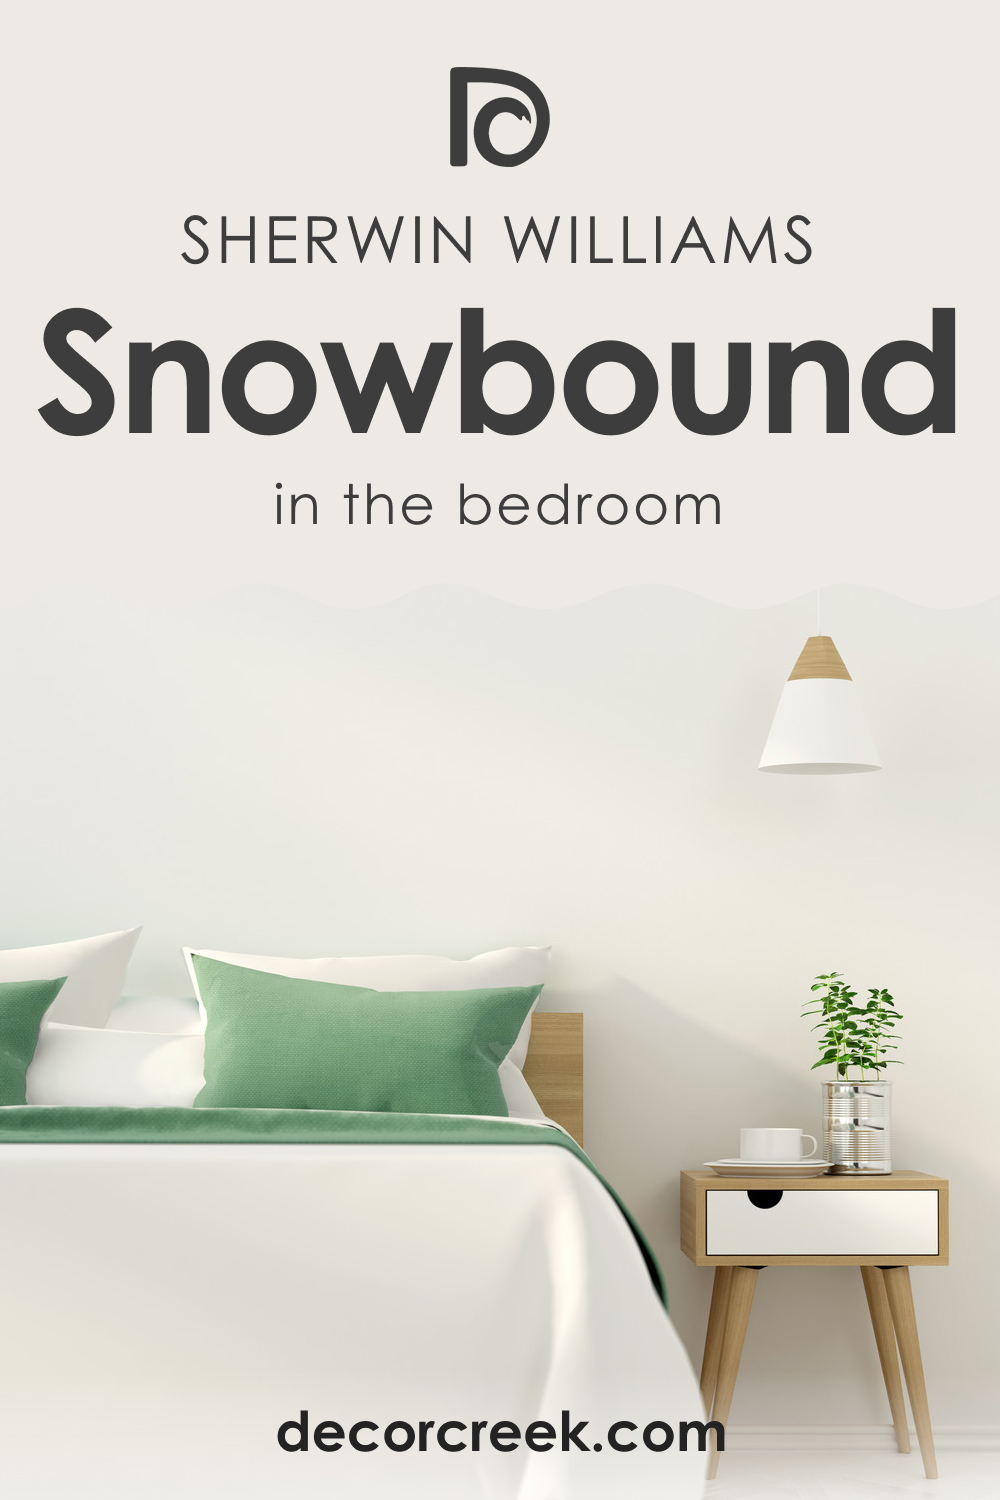 How to Use Snowbound SW 7004 in the Bedroom?